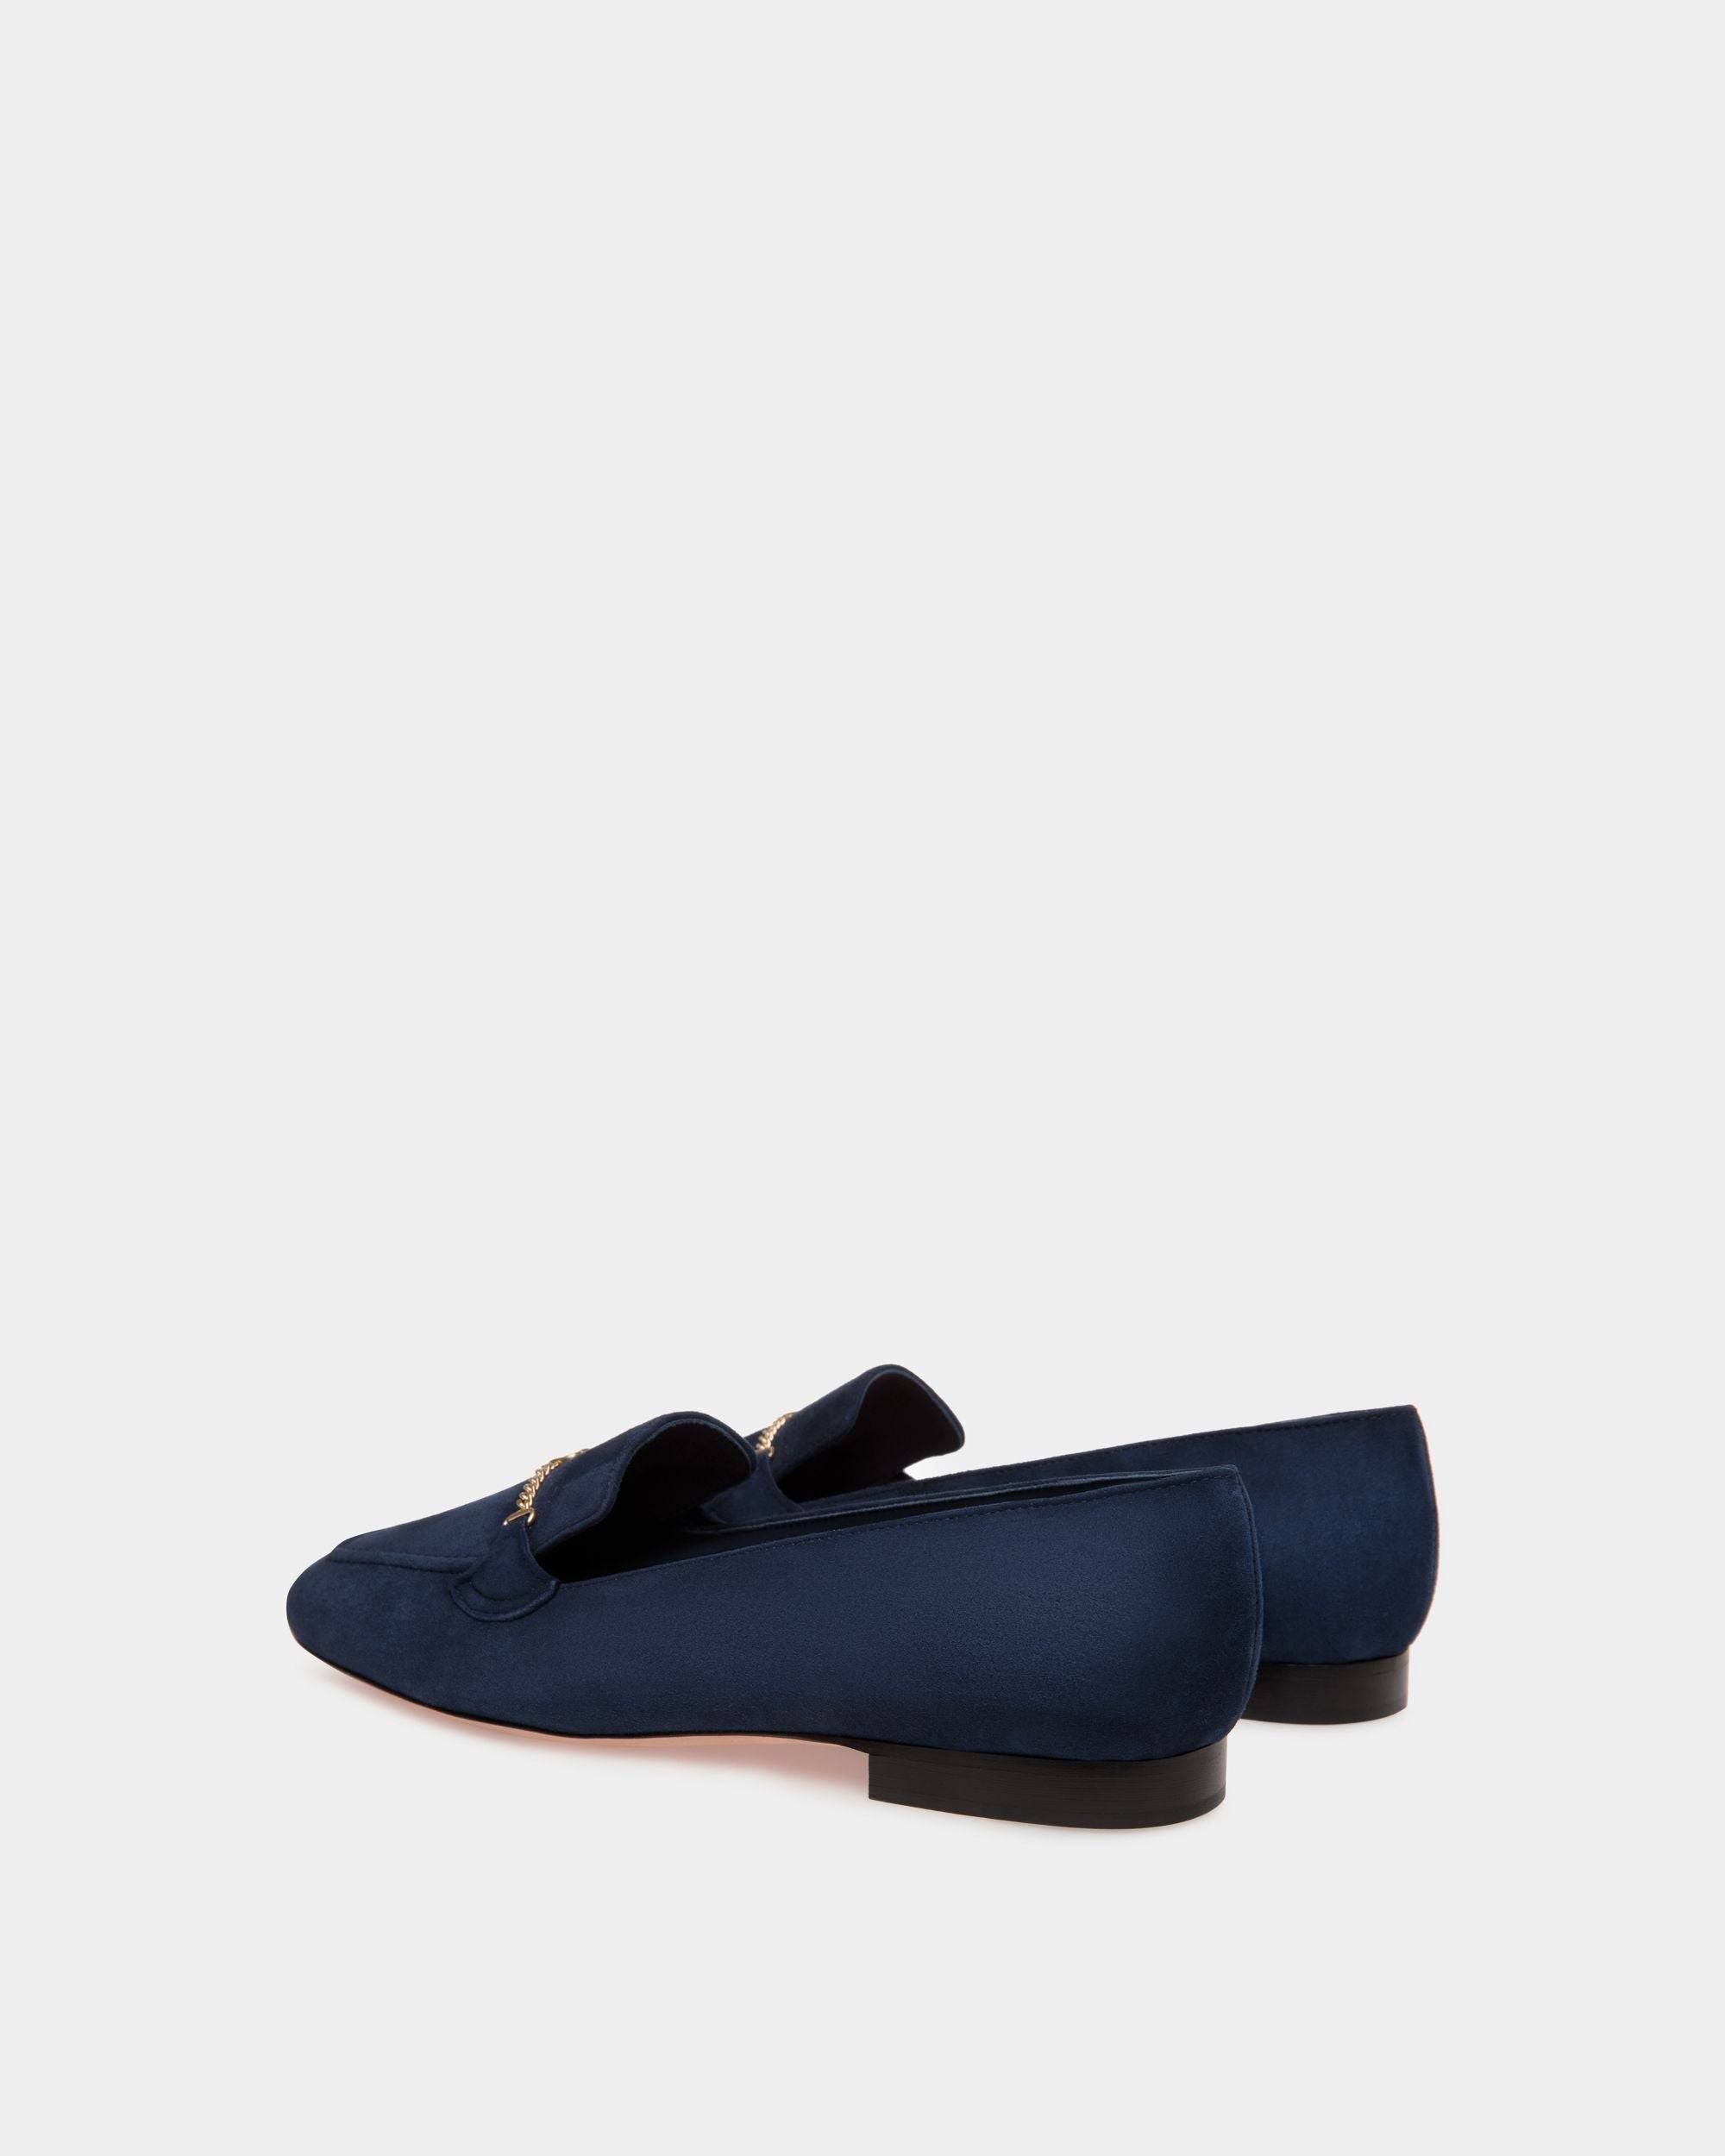 Daily Emblem | Women's Loafer in Blue Suede | Bally | Still Life 3/4 Back